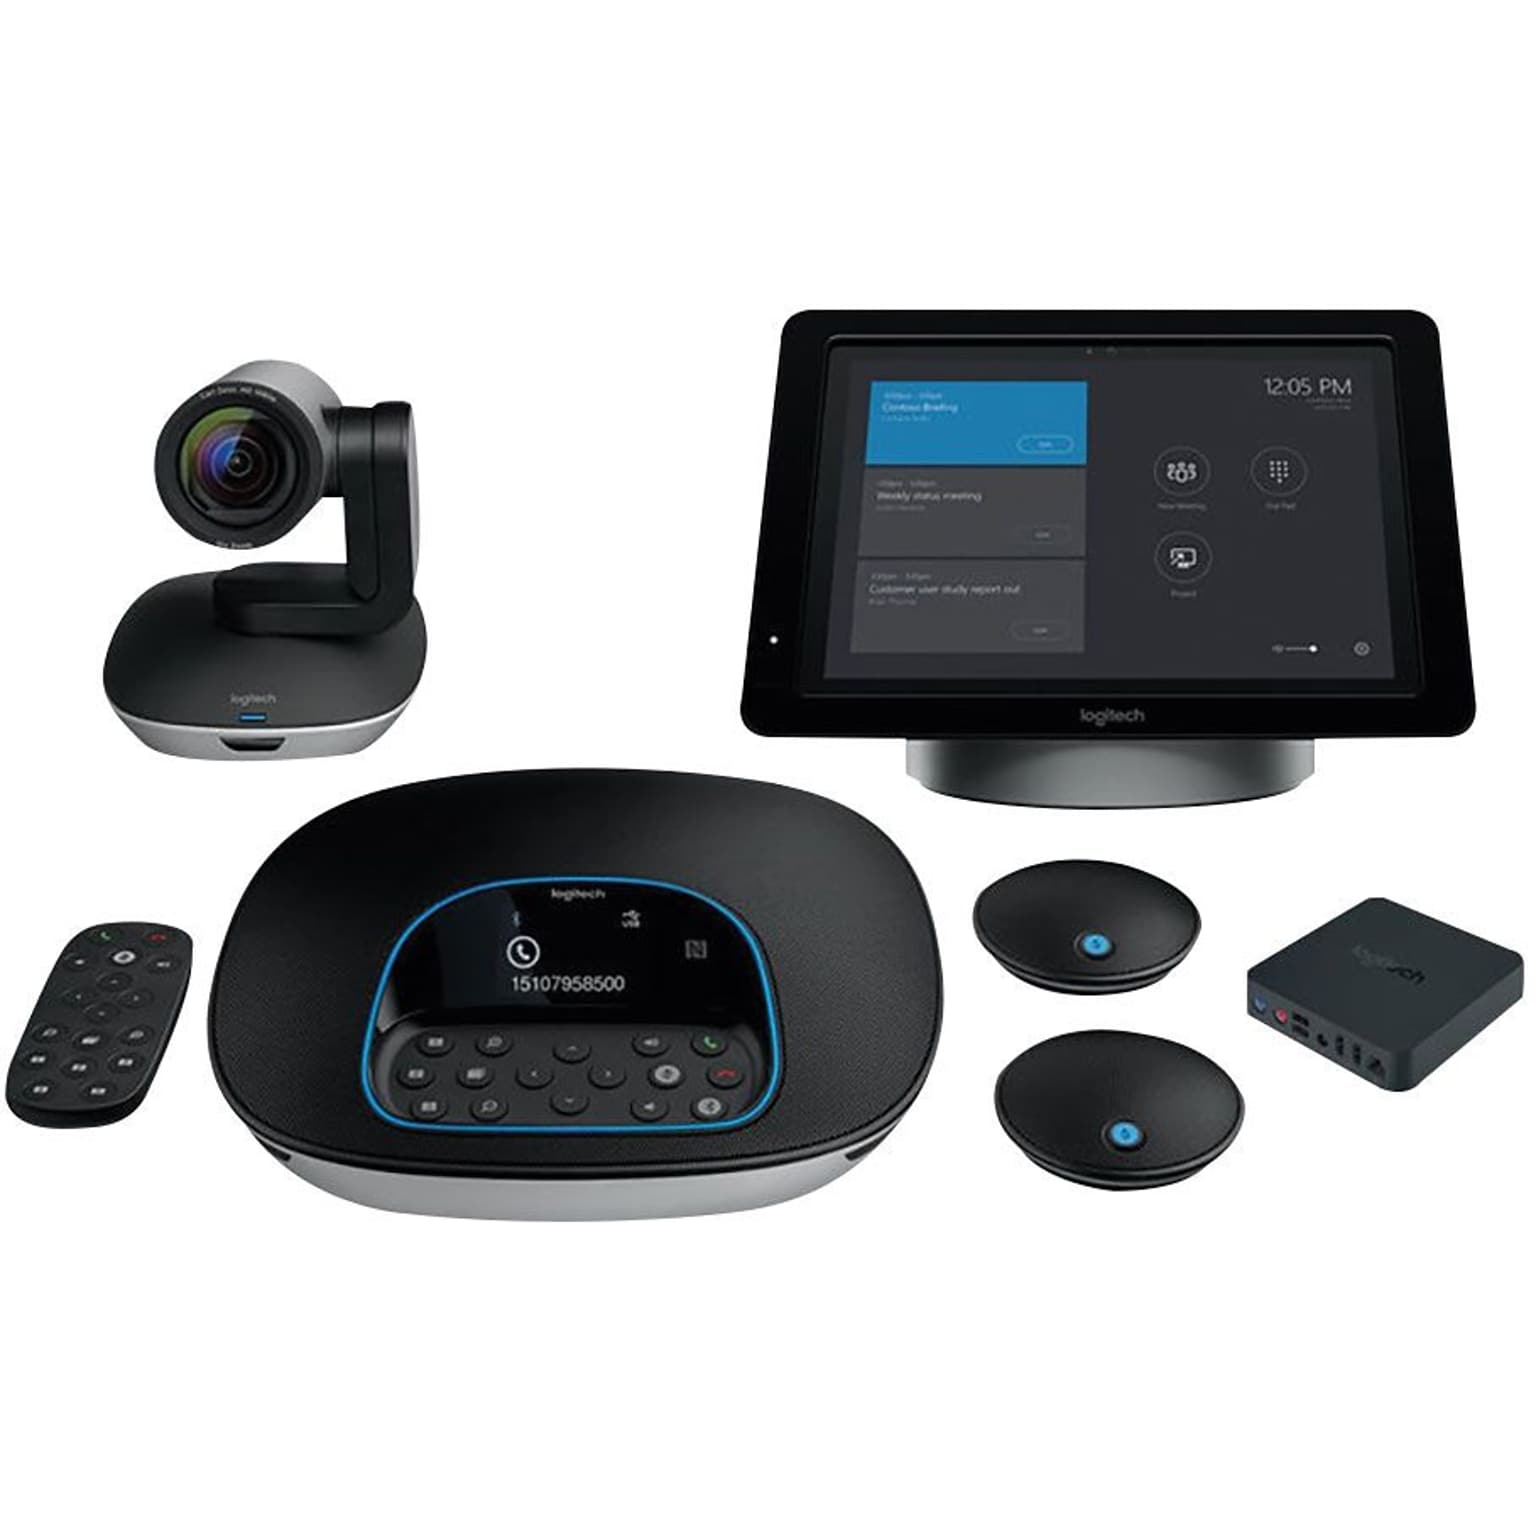 Logitech SmartDock Large Room Package for Skype Room Systems SOW and Integration required